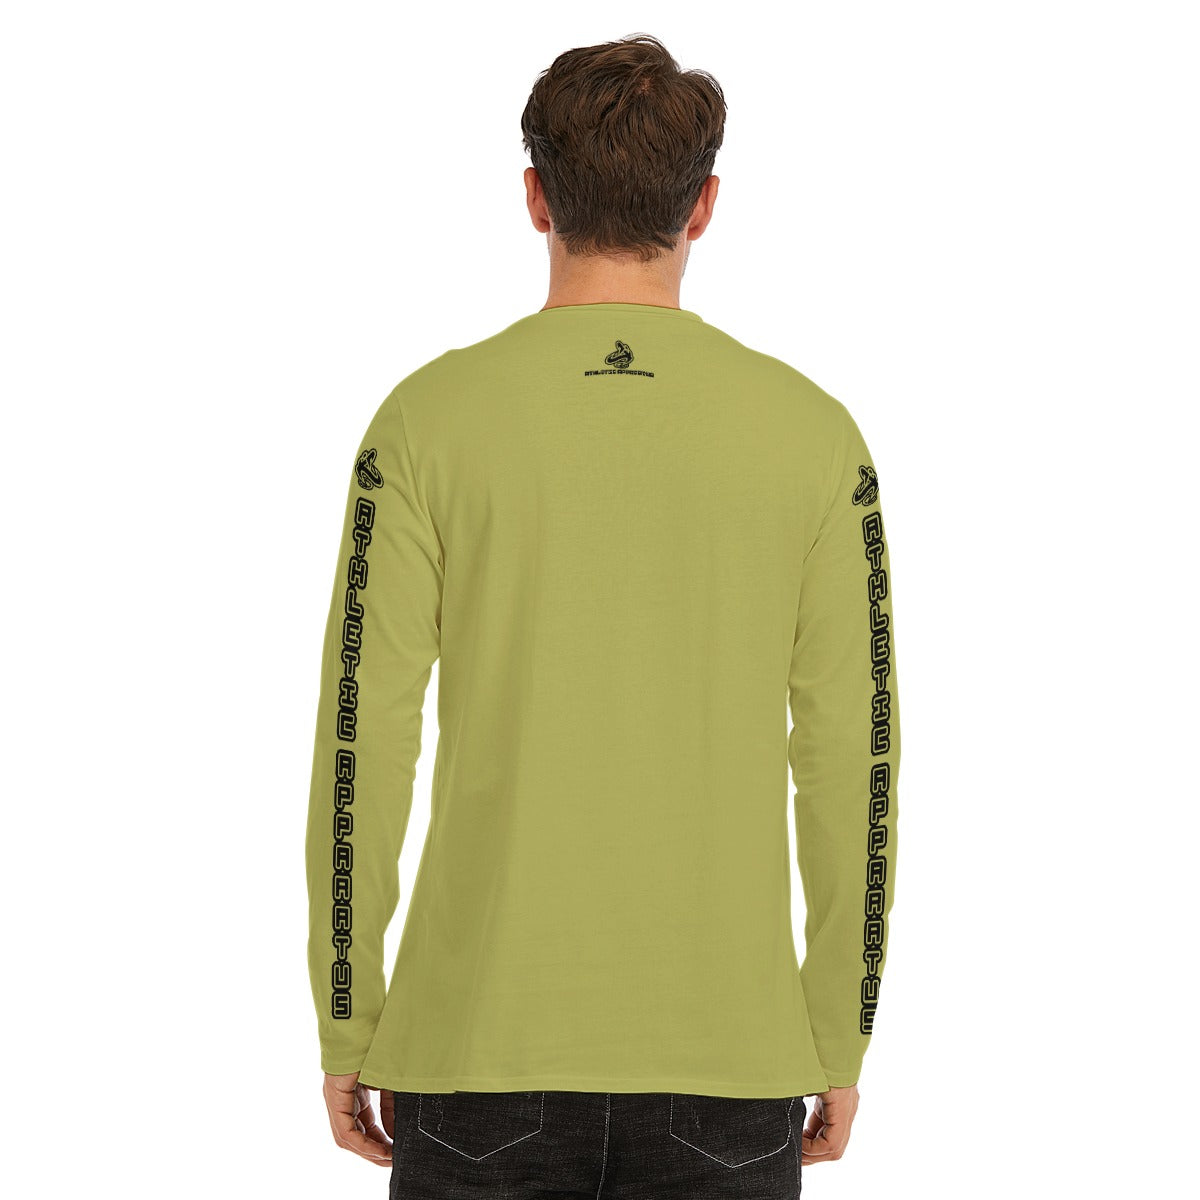 
                  
                    A.A. O. Green BL Long Sleeve Courage fuels greatness
                  
                